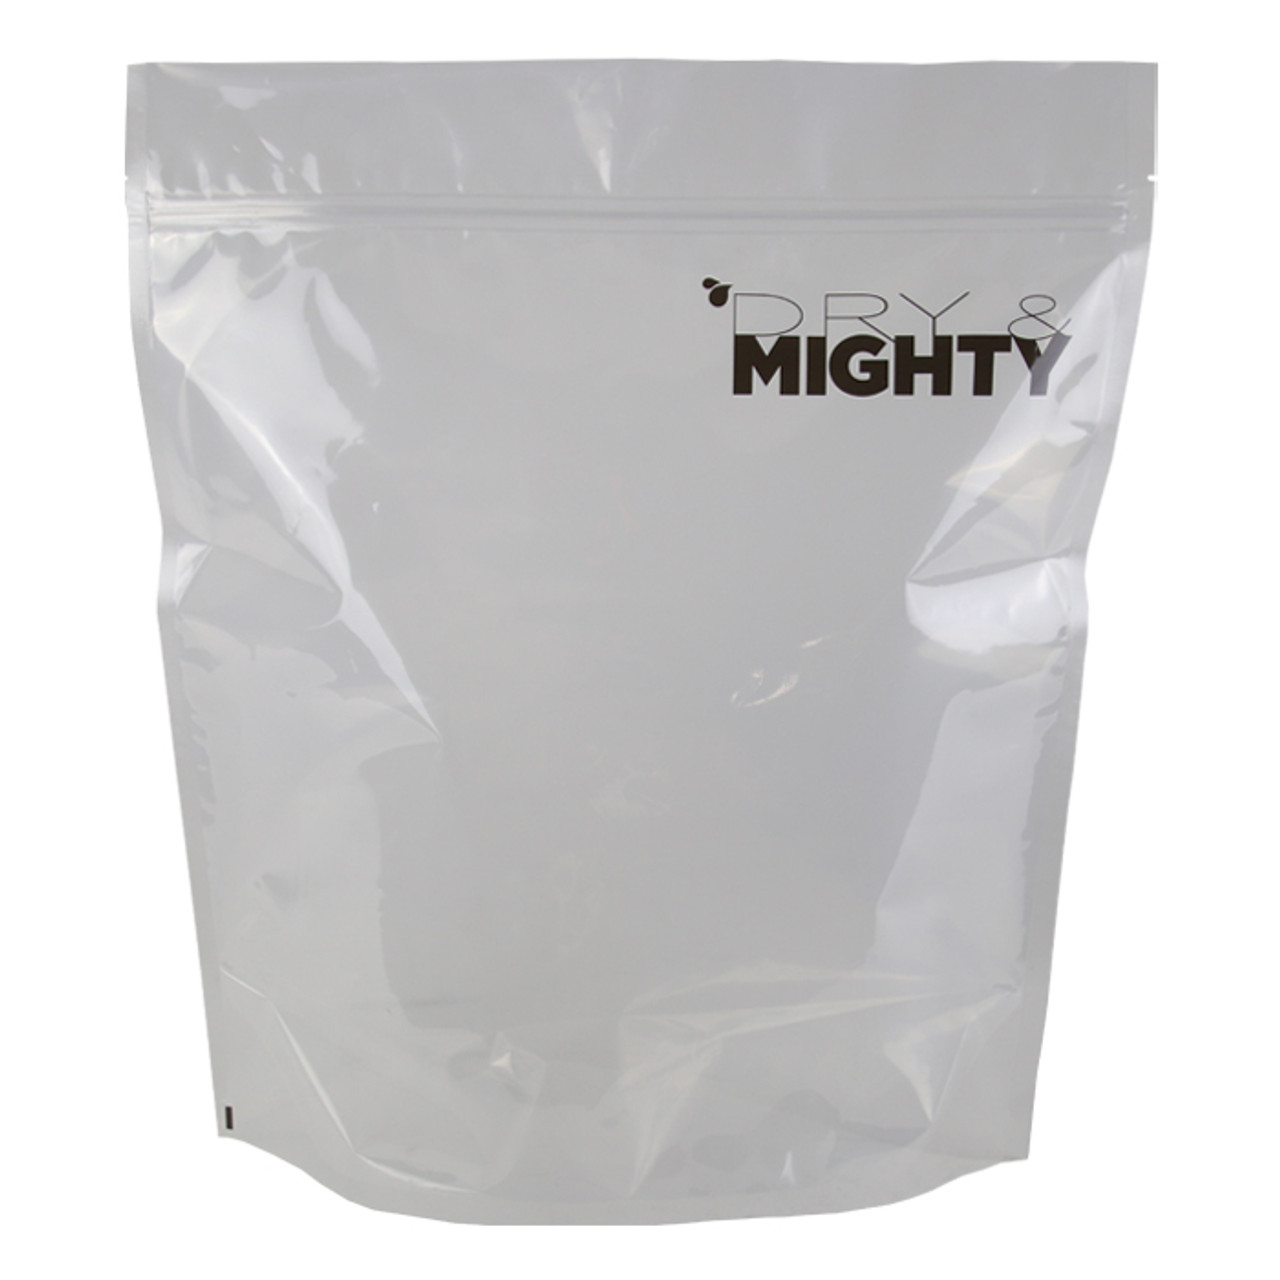 Dry & Mighty Bag X-Large (500